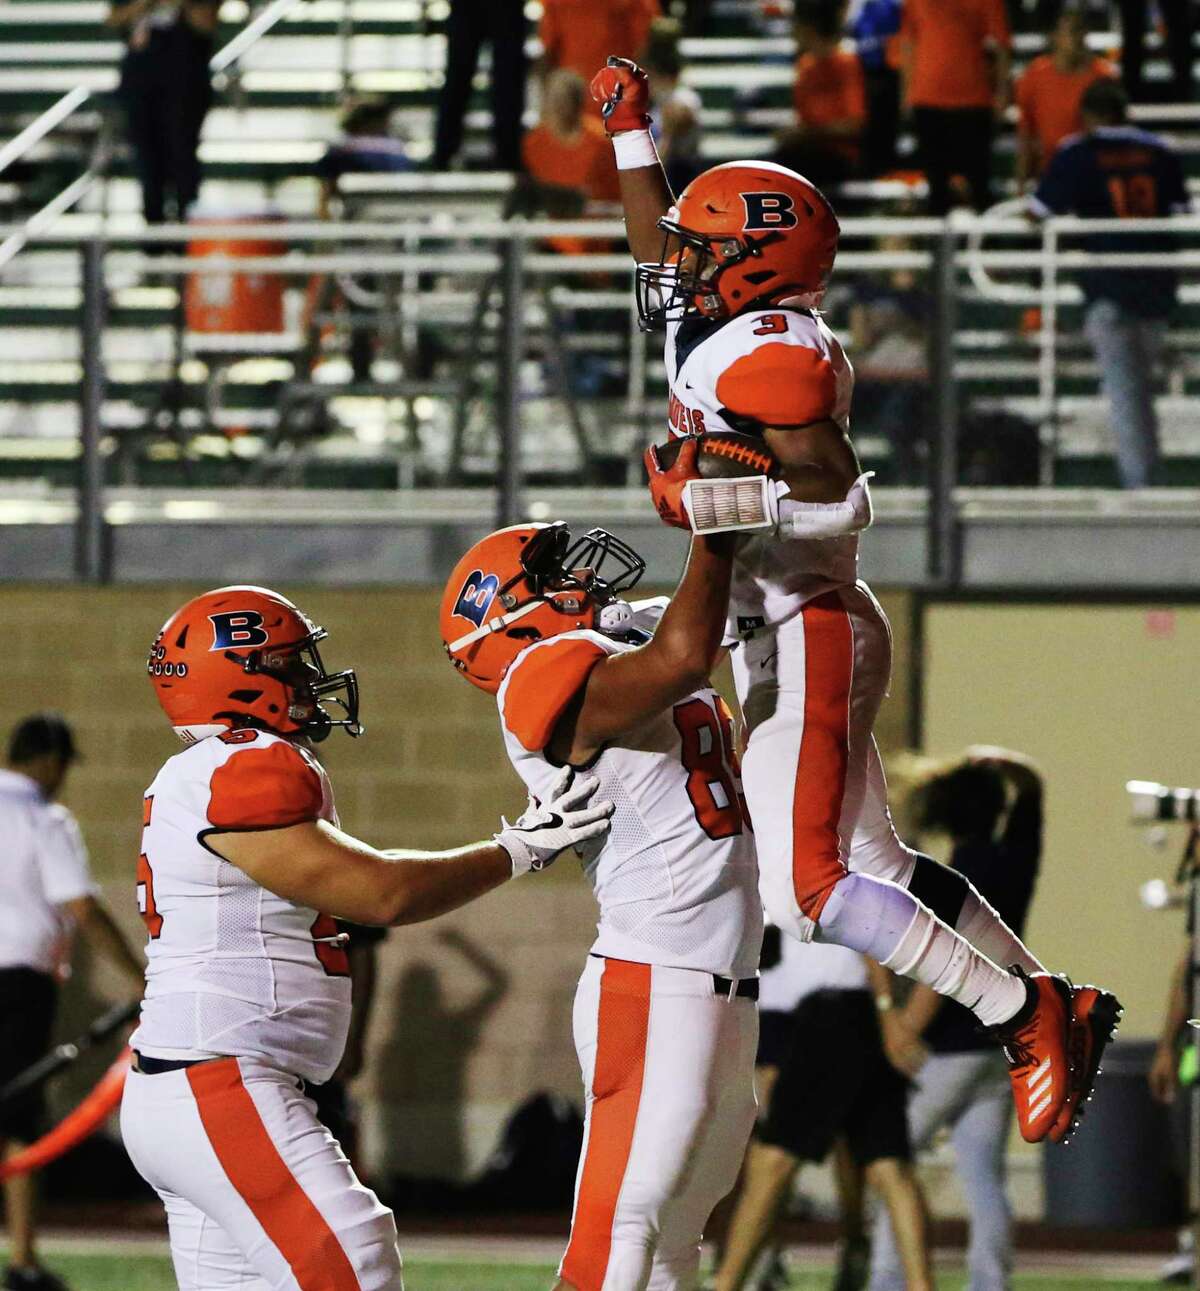 Brandeis' running back Corion Holmes (03) gets lifted up by teammate Kris Bowen (89) after Holmes scores a touchdown against Brennan during their game at Farris Stadium on Friday, Sept. 27, 2019. (Kin Man Hui/San Antonio Express-News)